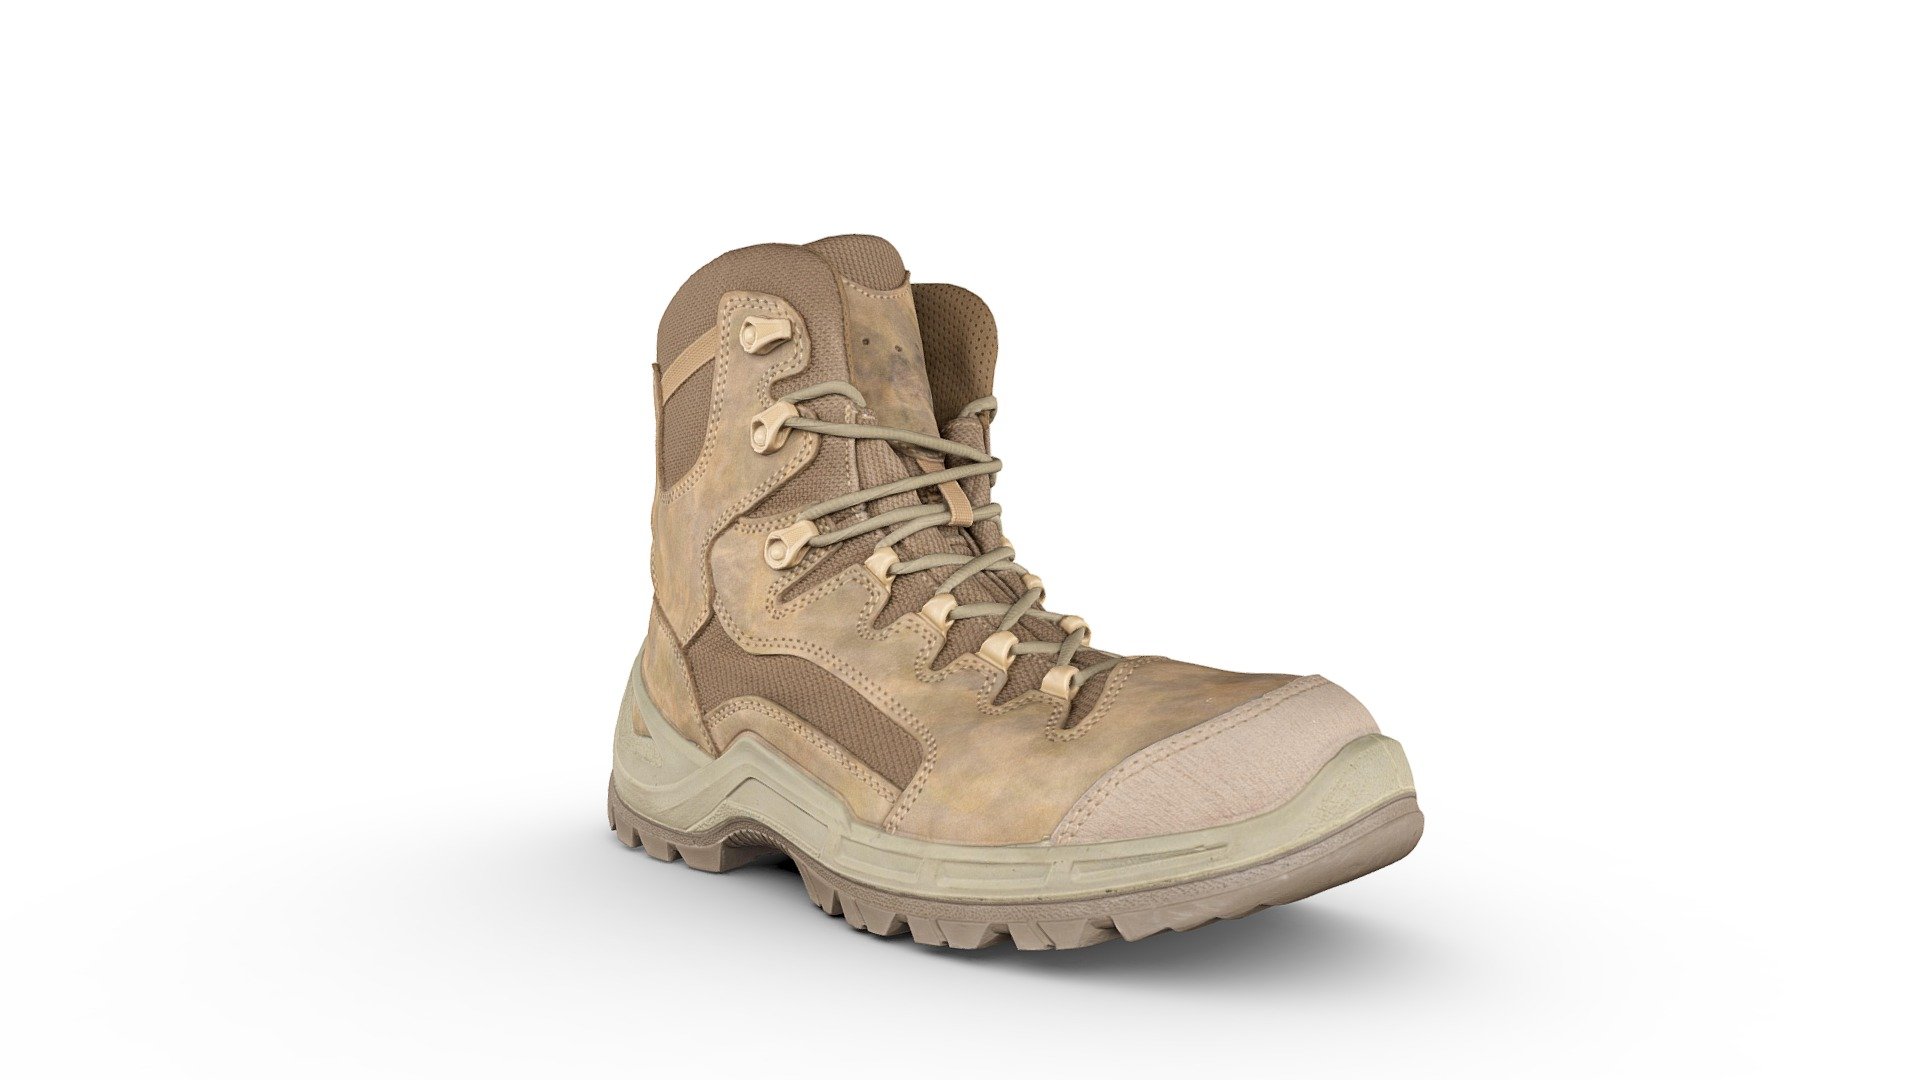 Example of our 3D scan of boots 3d model